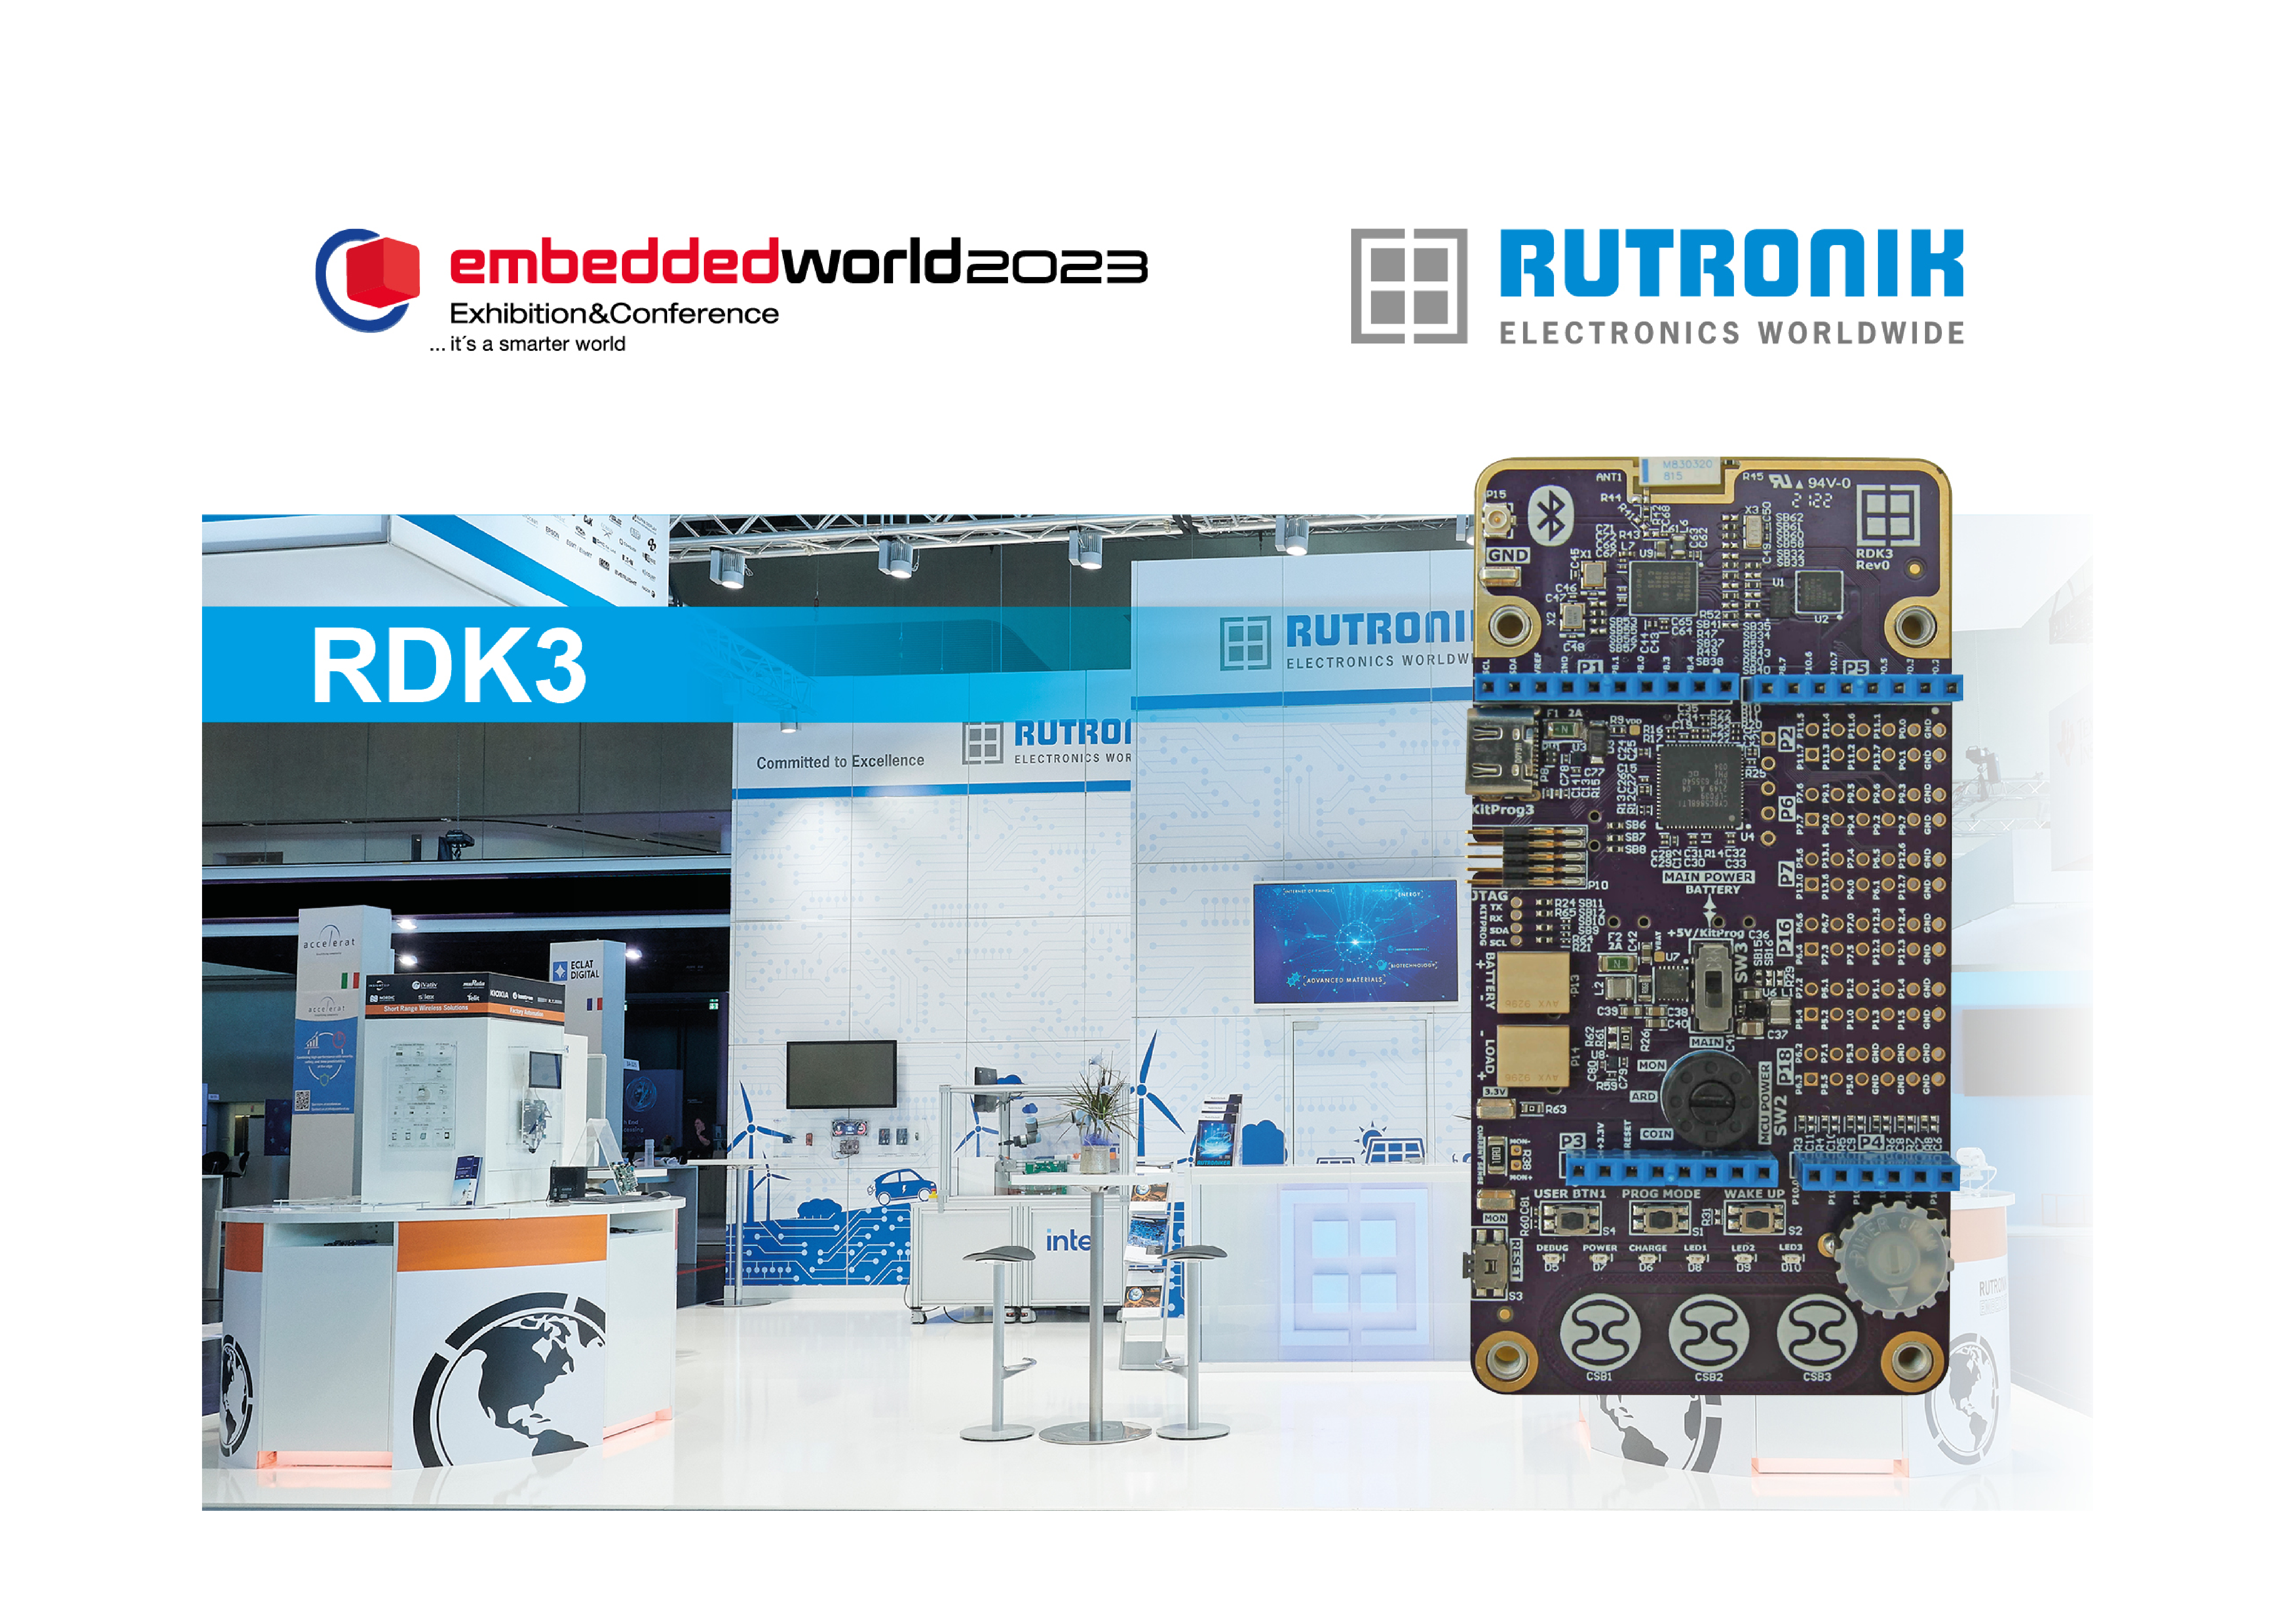 In addition to products from leading manufacturers, Rutronik System Solutions presents the new base board RDK3 for the first time at embedded world 2023.